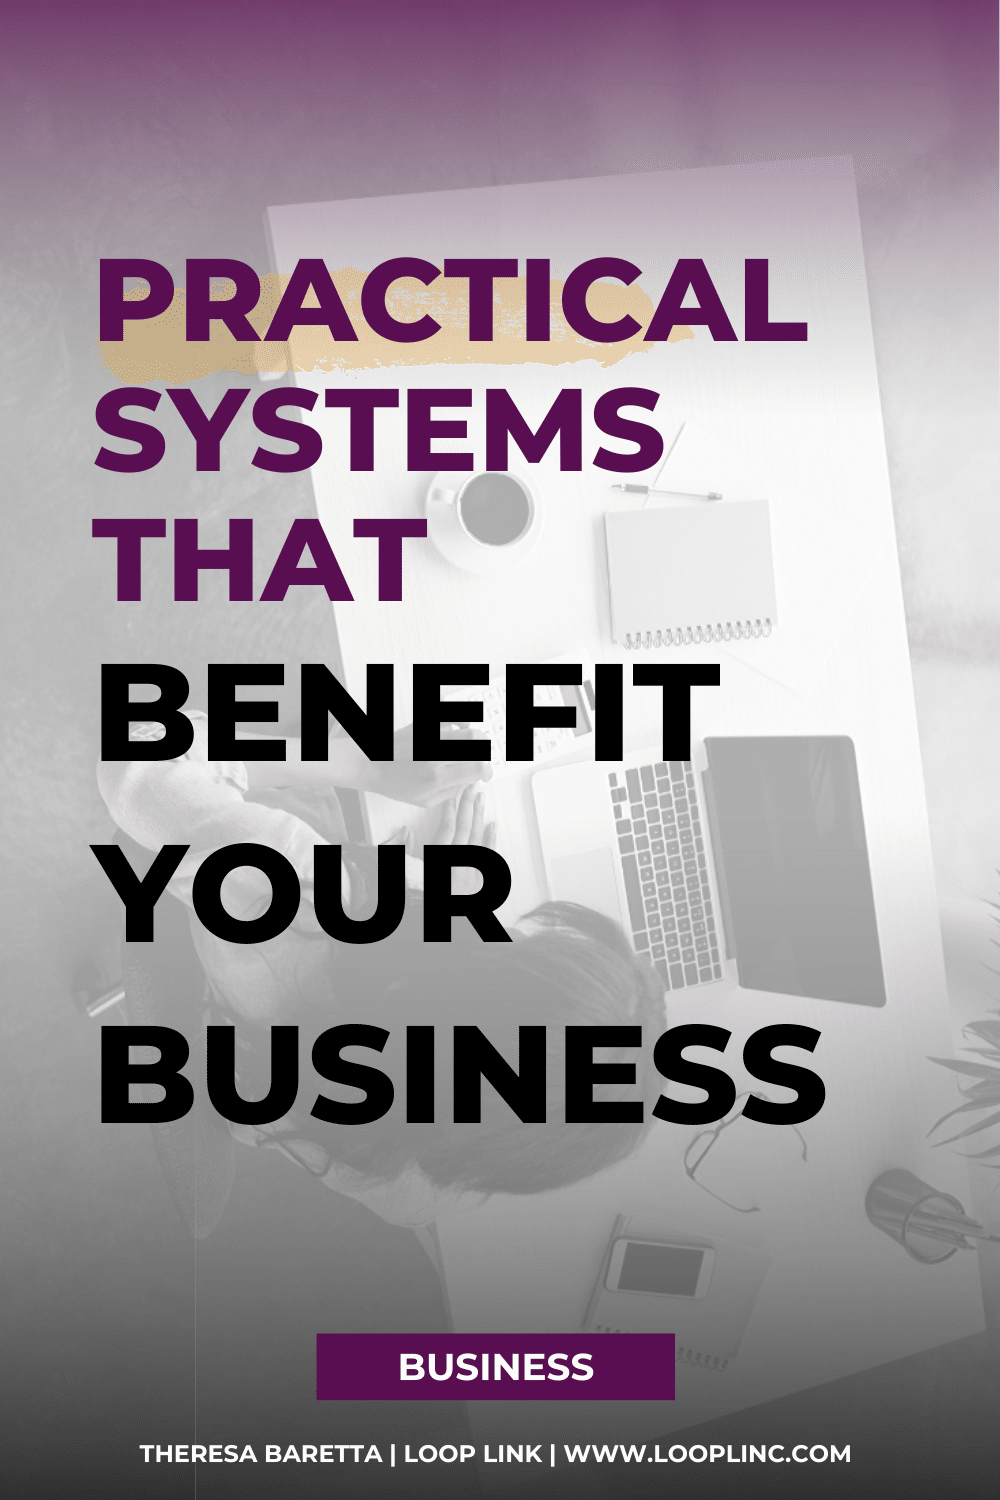 Practical Systems that Benefit Your Business